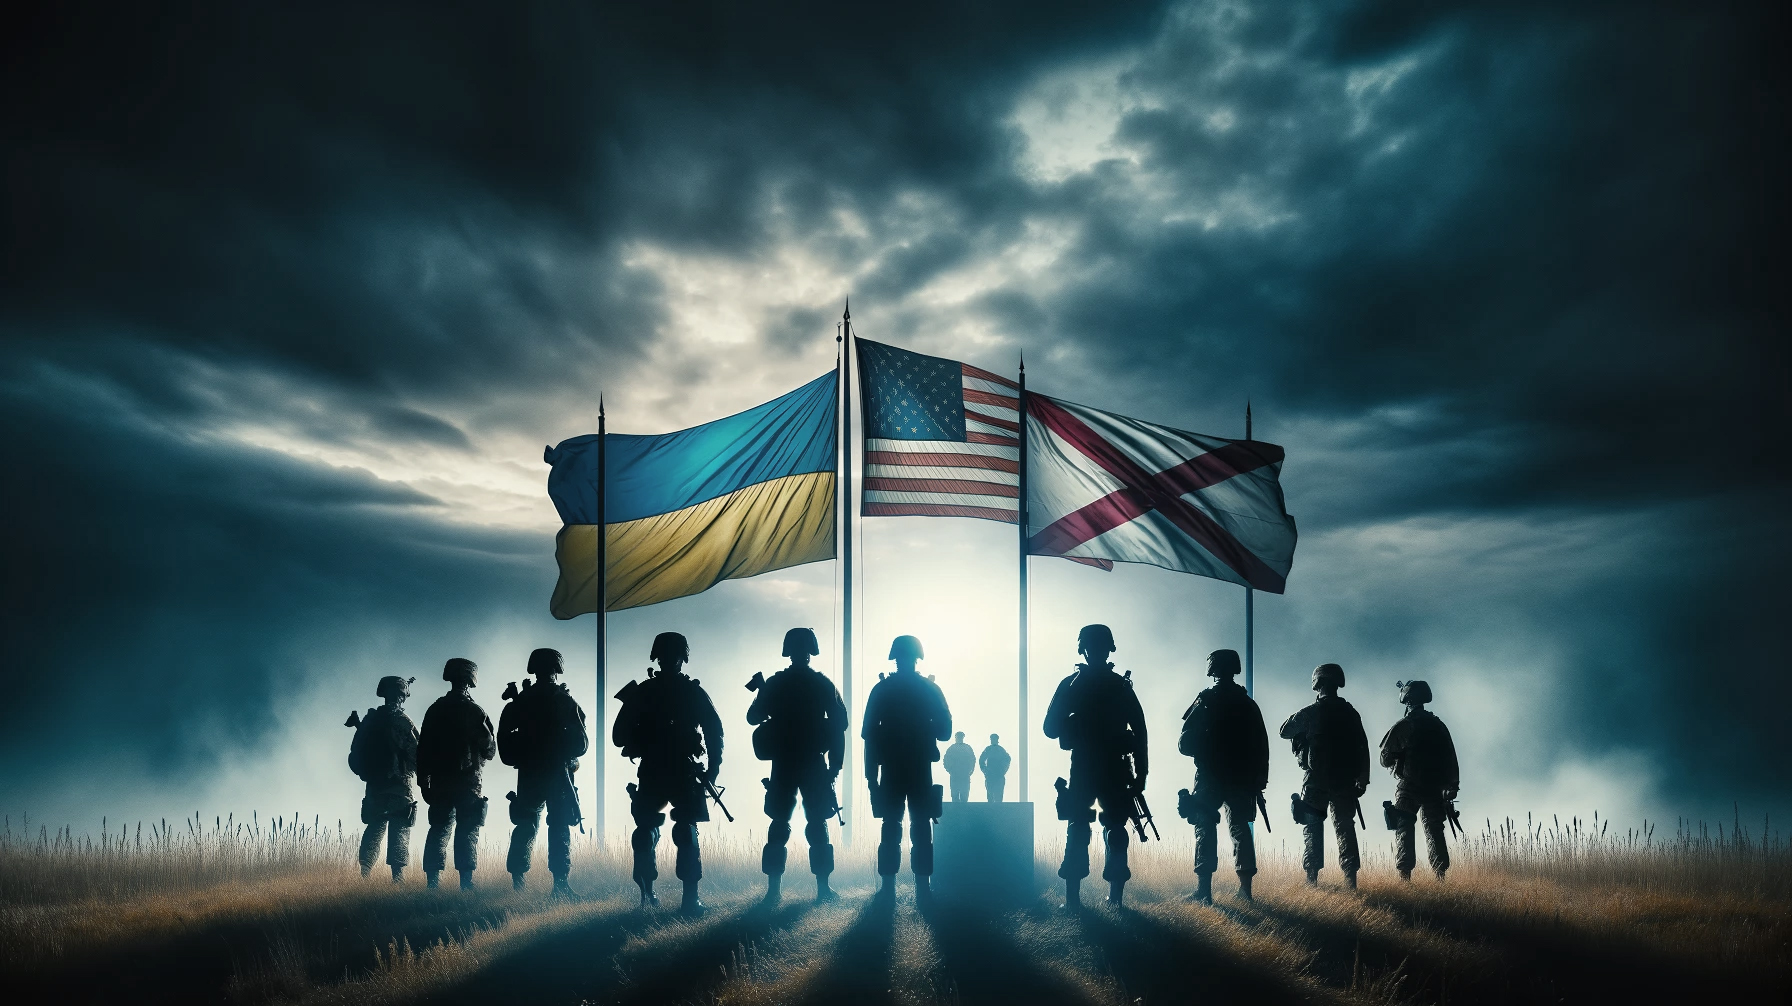 A landscape-oriented image featuring Ukrainian and American soldiers standing beneath the Ukrainian, United States, and Alabama State flags. The soldi